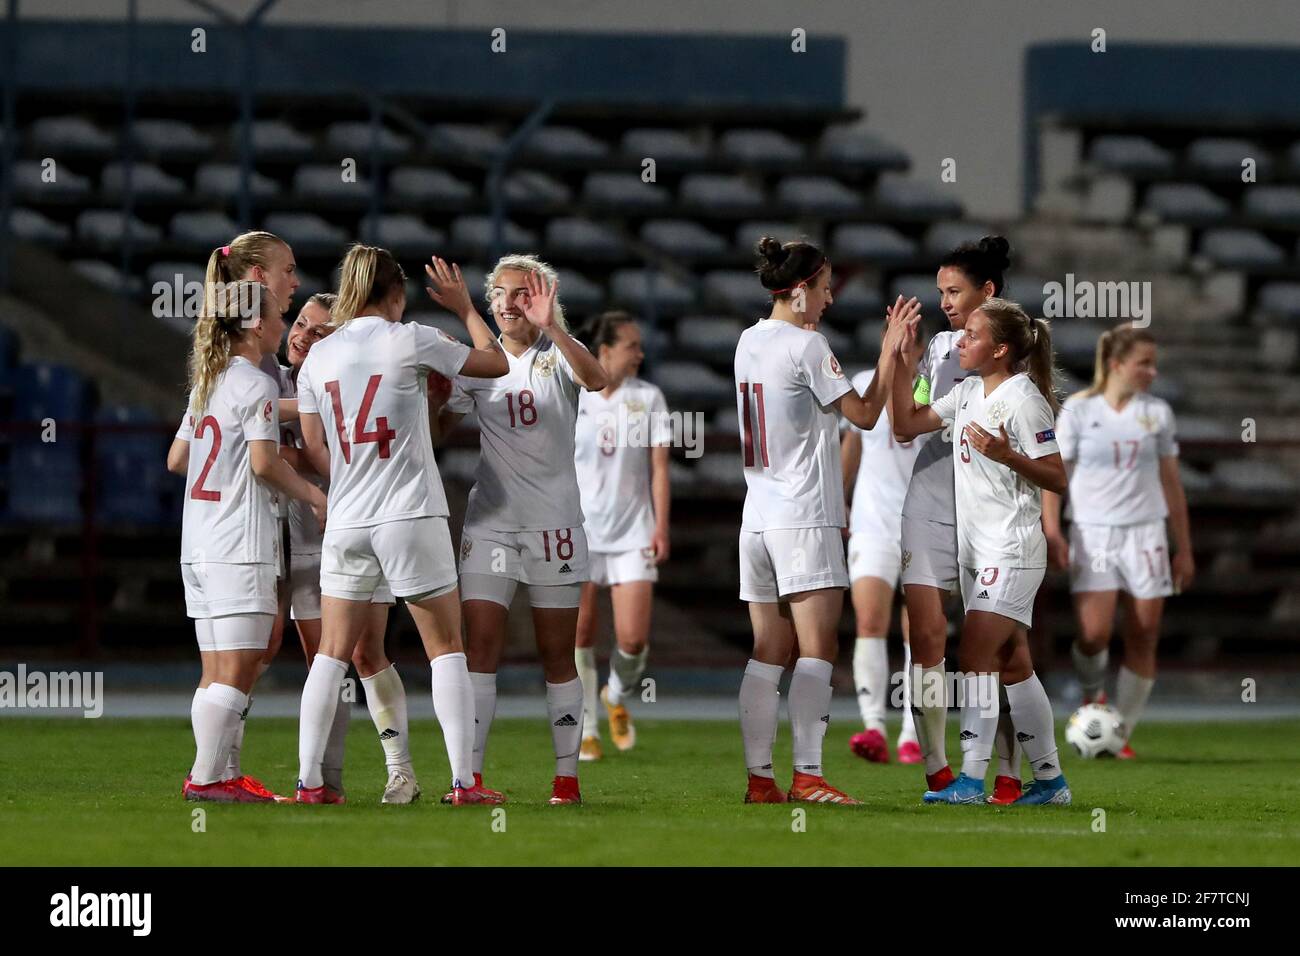 Lisbon, Portugal. 9th Apr, 2021. Russia's team players celebrate the victory at the end of the UEFA Women's EURO 2022 play-off first leg match between Portugal and Russia, at the Restelo stadium in Lisbon, Portugal, on April 9, 2021. Credit: Pedro Fiuza/ZUMA Wire/Alamy Live News Stock Photo